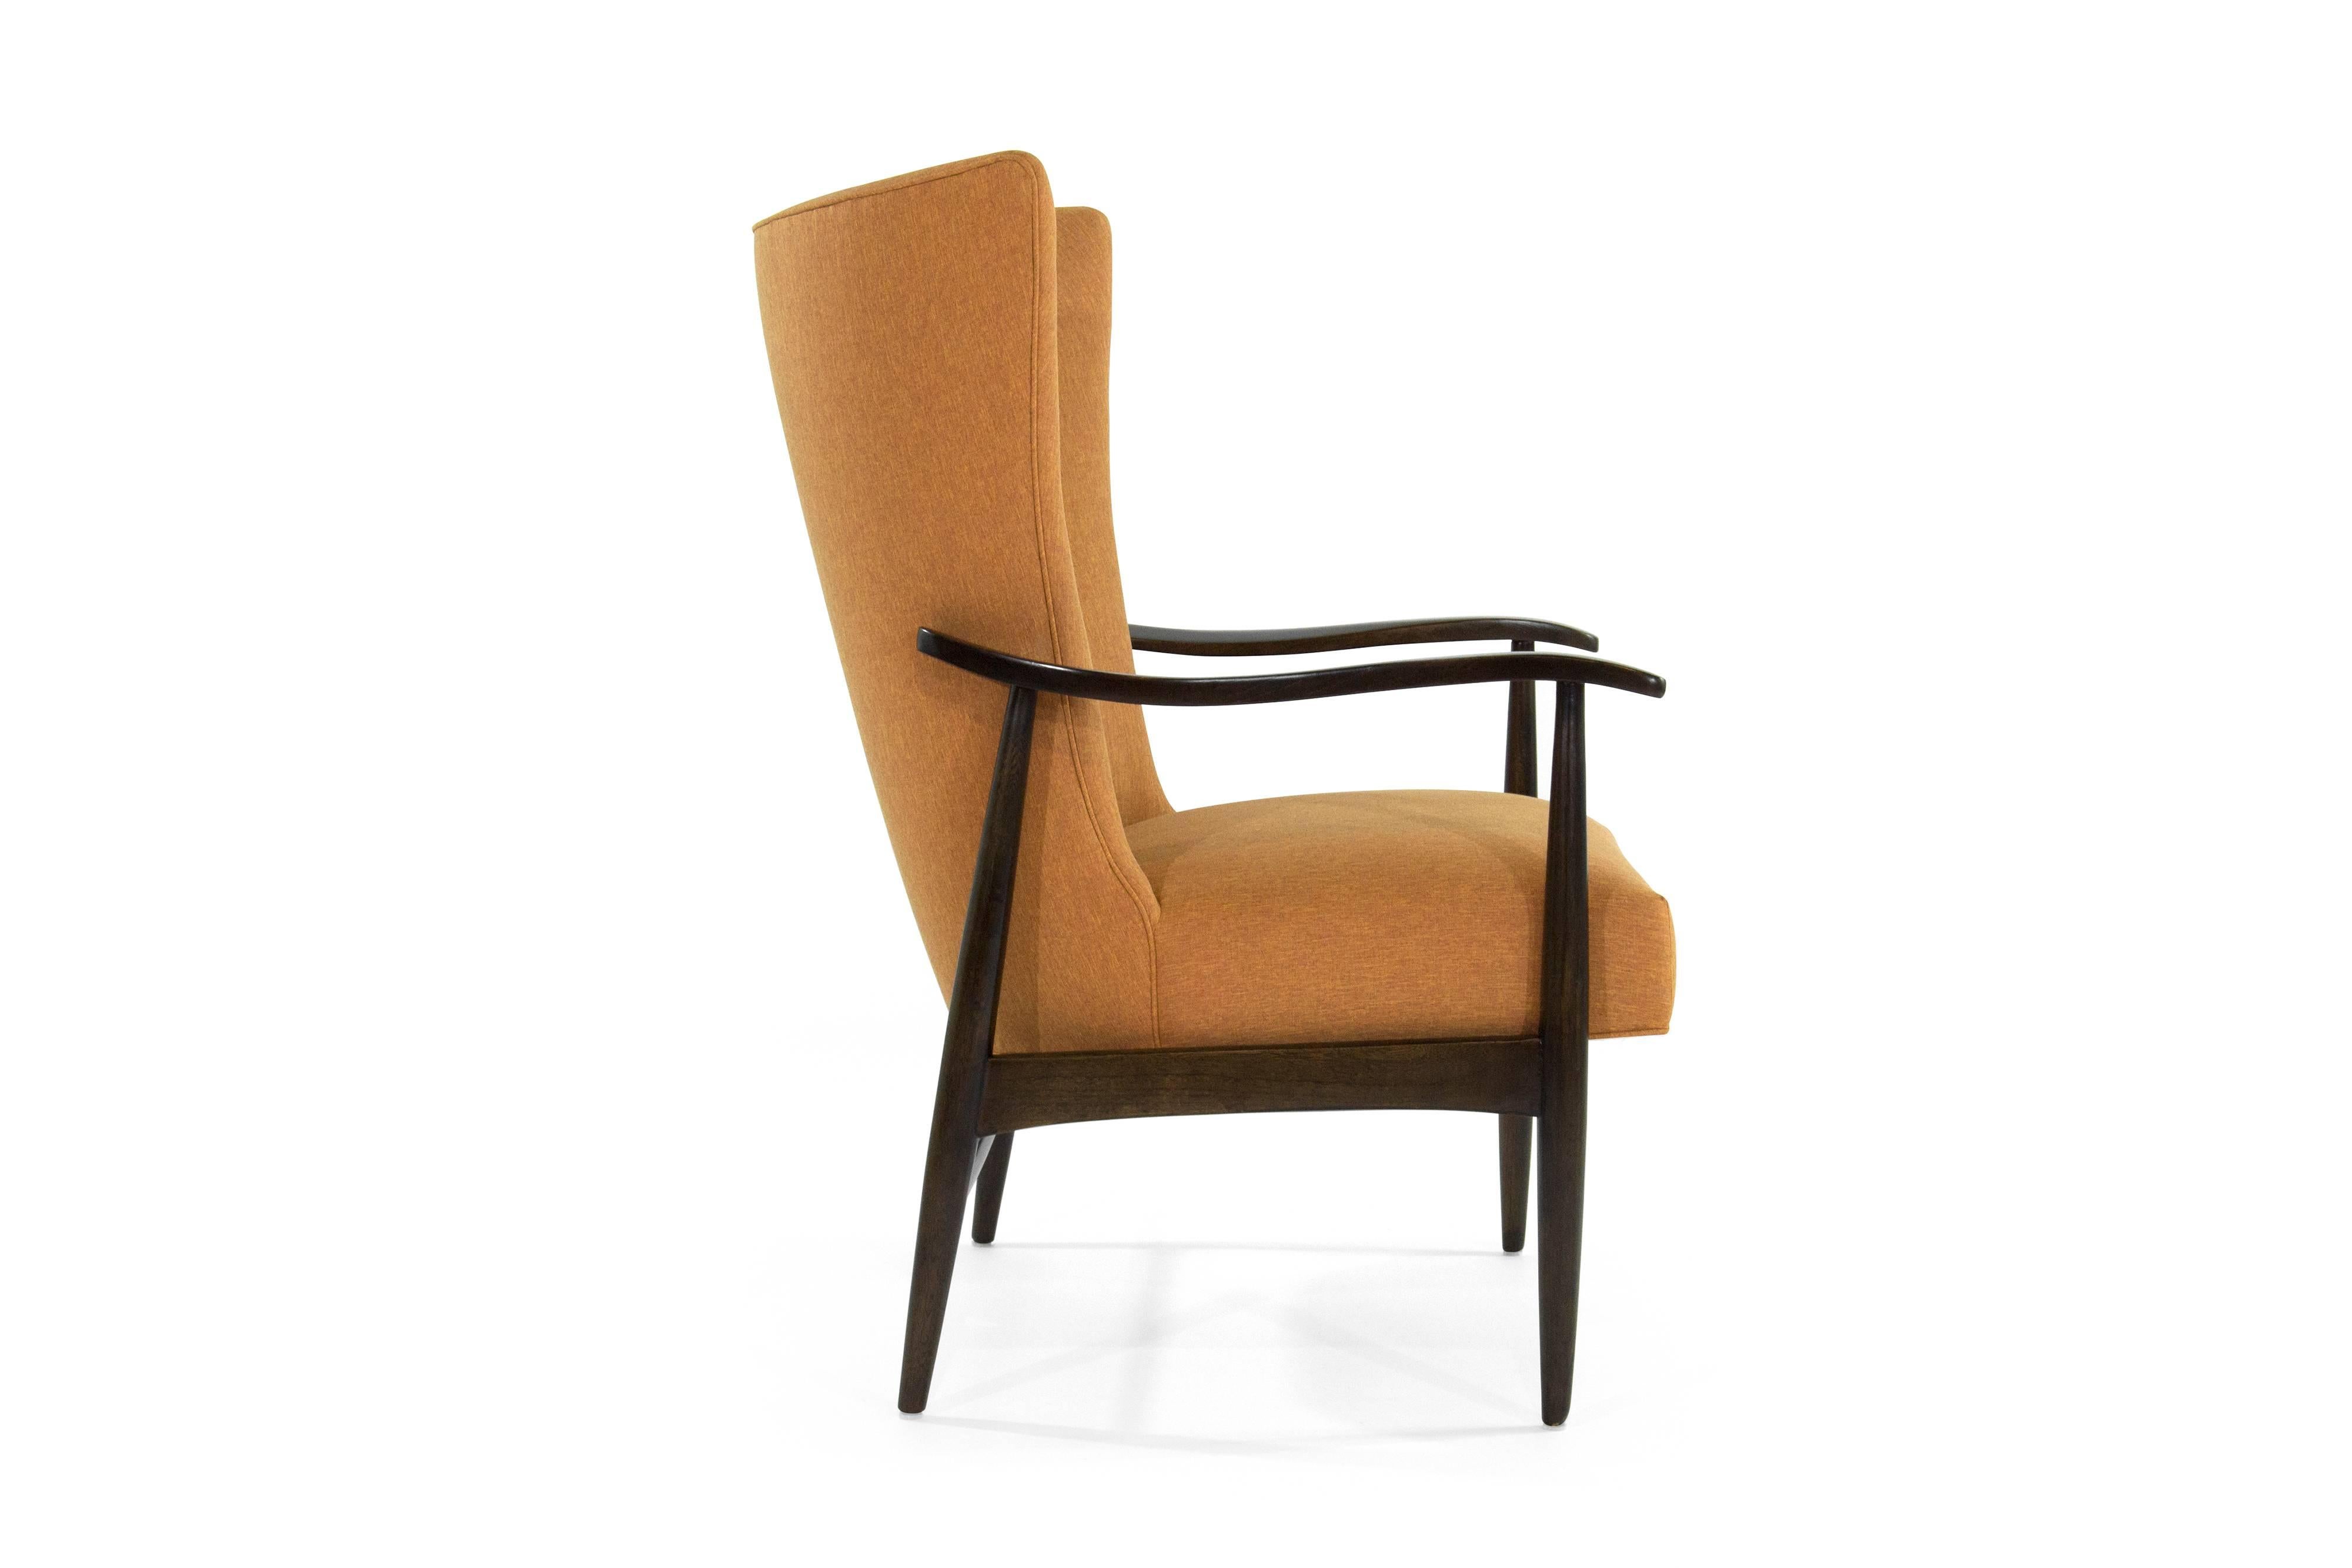 Wingback lounge chair made in Denmark, circa 1950s. Newly upholstered in linen; sculptural teak framing fully restored. Perfect in a bedroom setting, office or library.